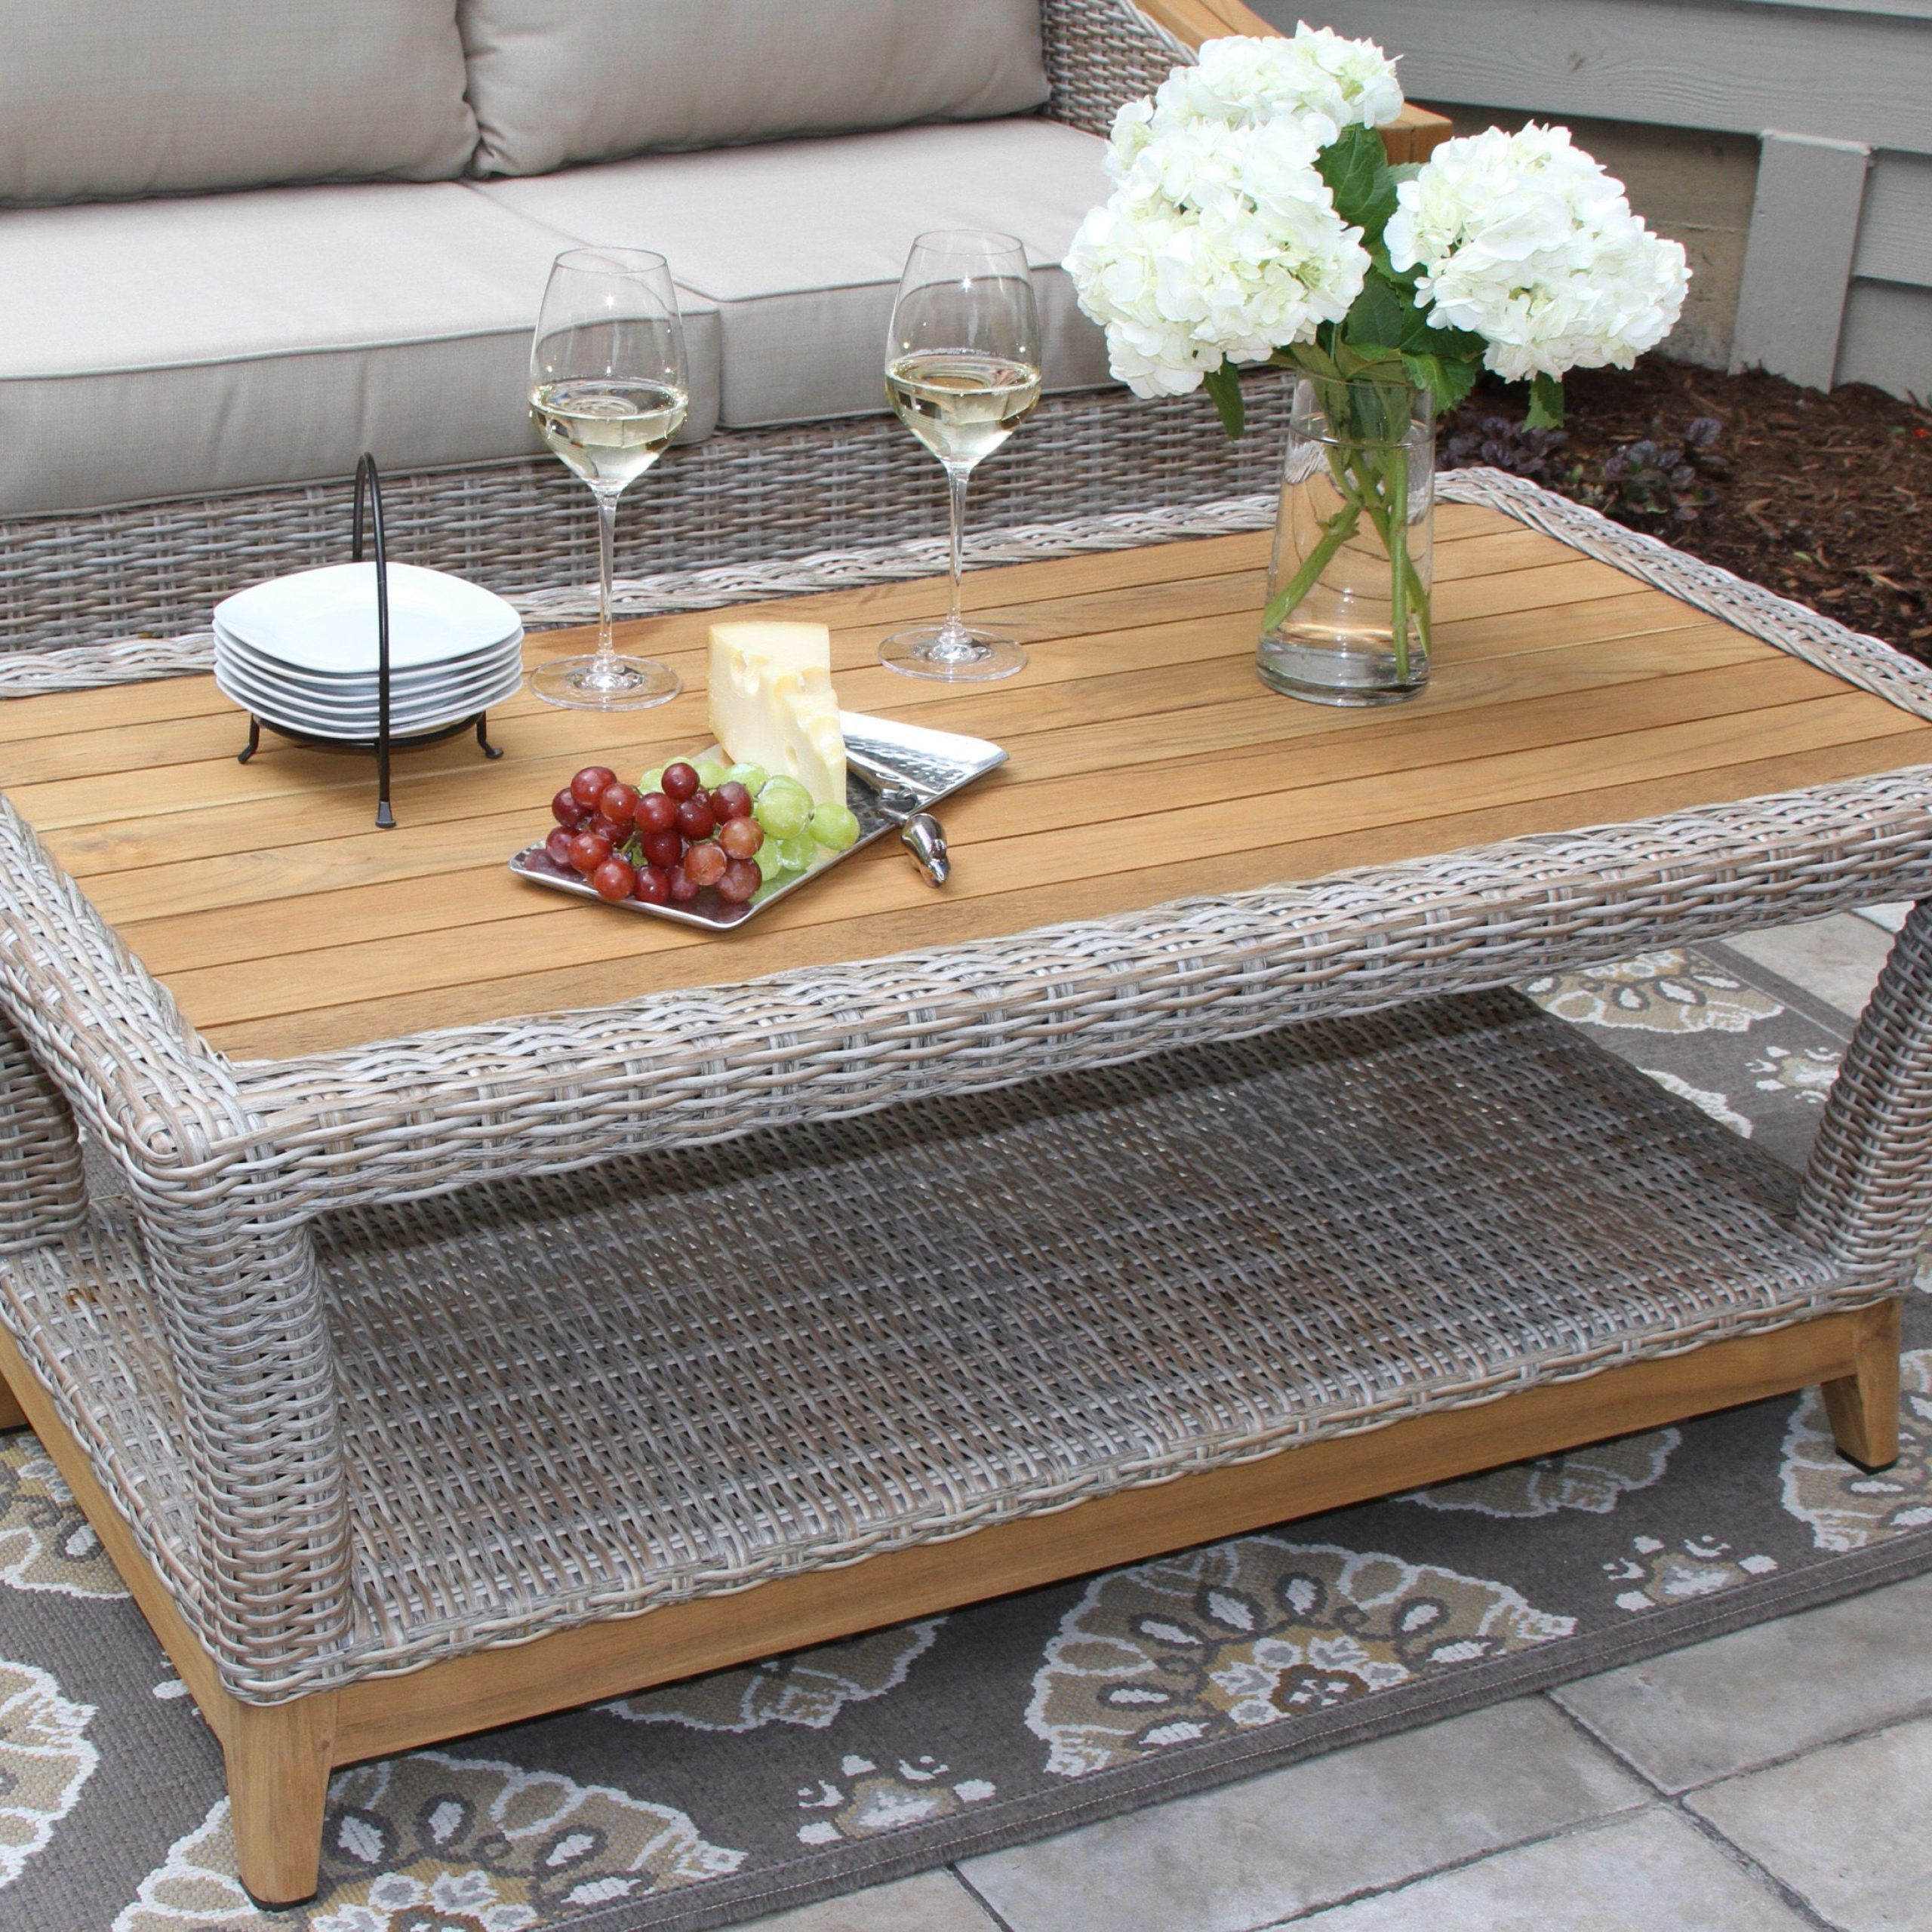 How To Decorate An Outdoor Coffee Table – Coffee Table Decor Pertaining To Well Known Outdoor Half Round Coffee Tables (View 8 of 15)